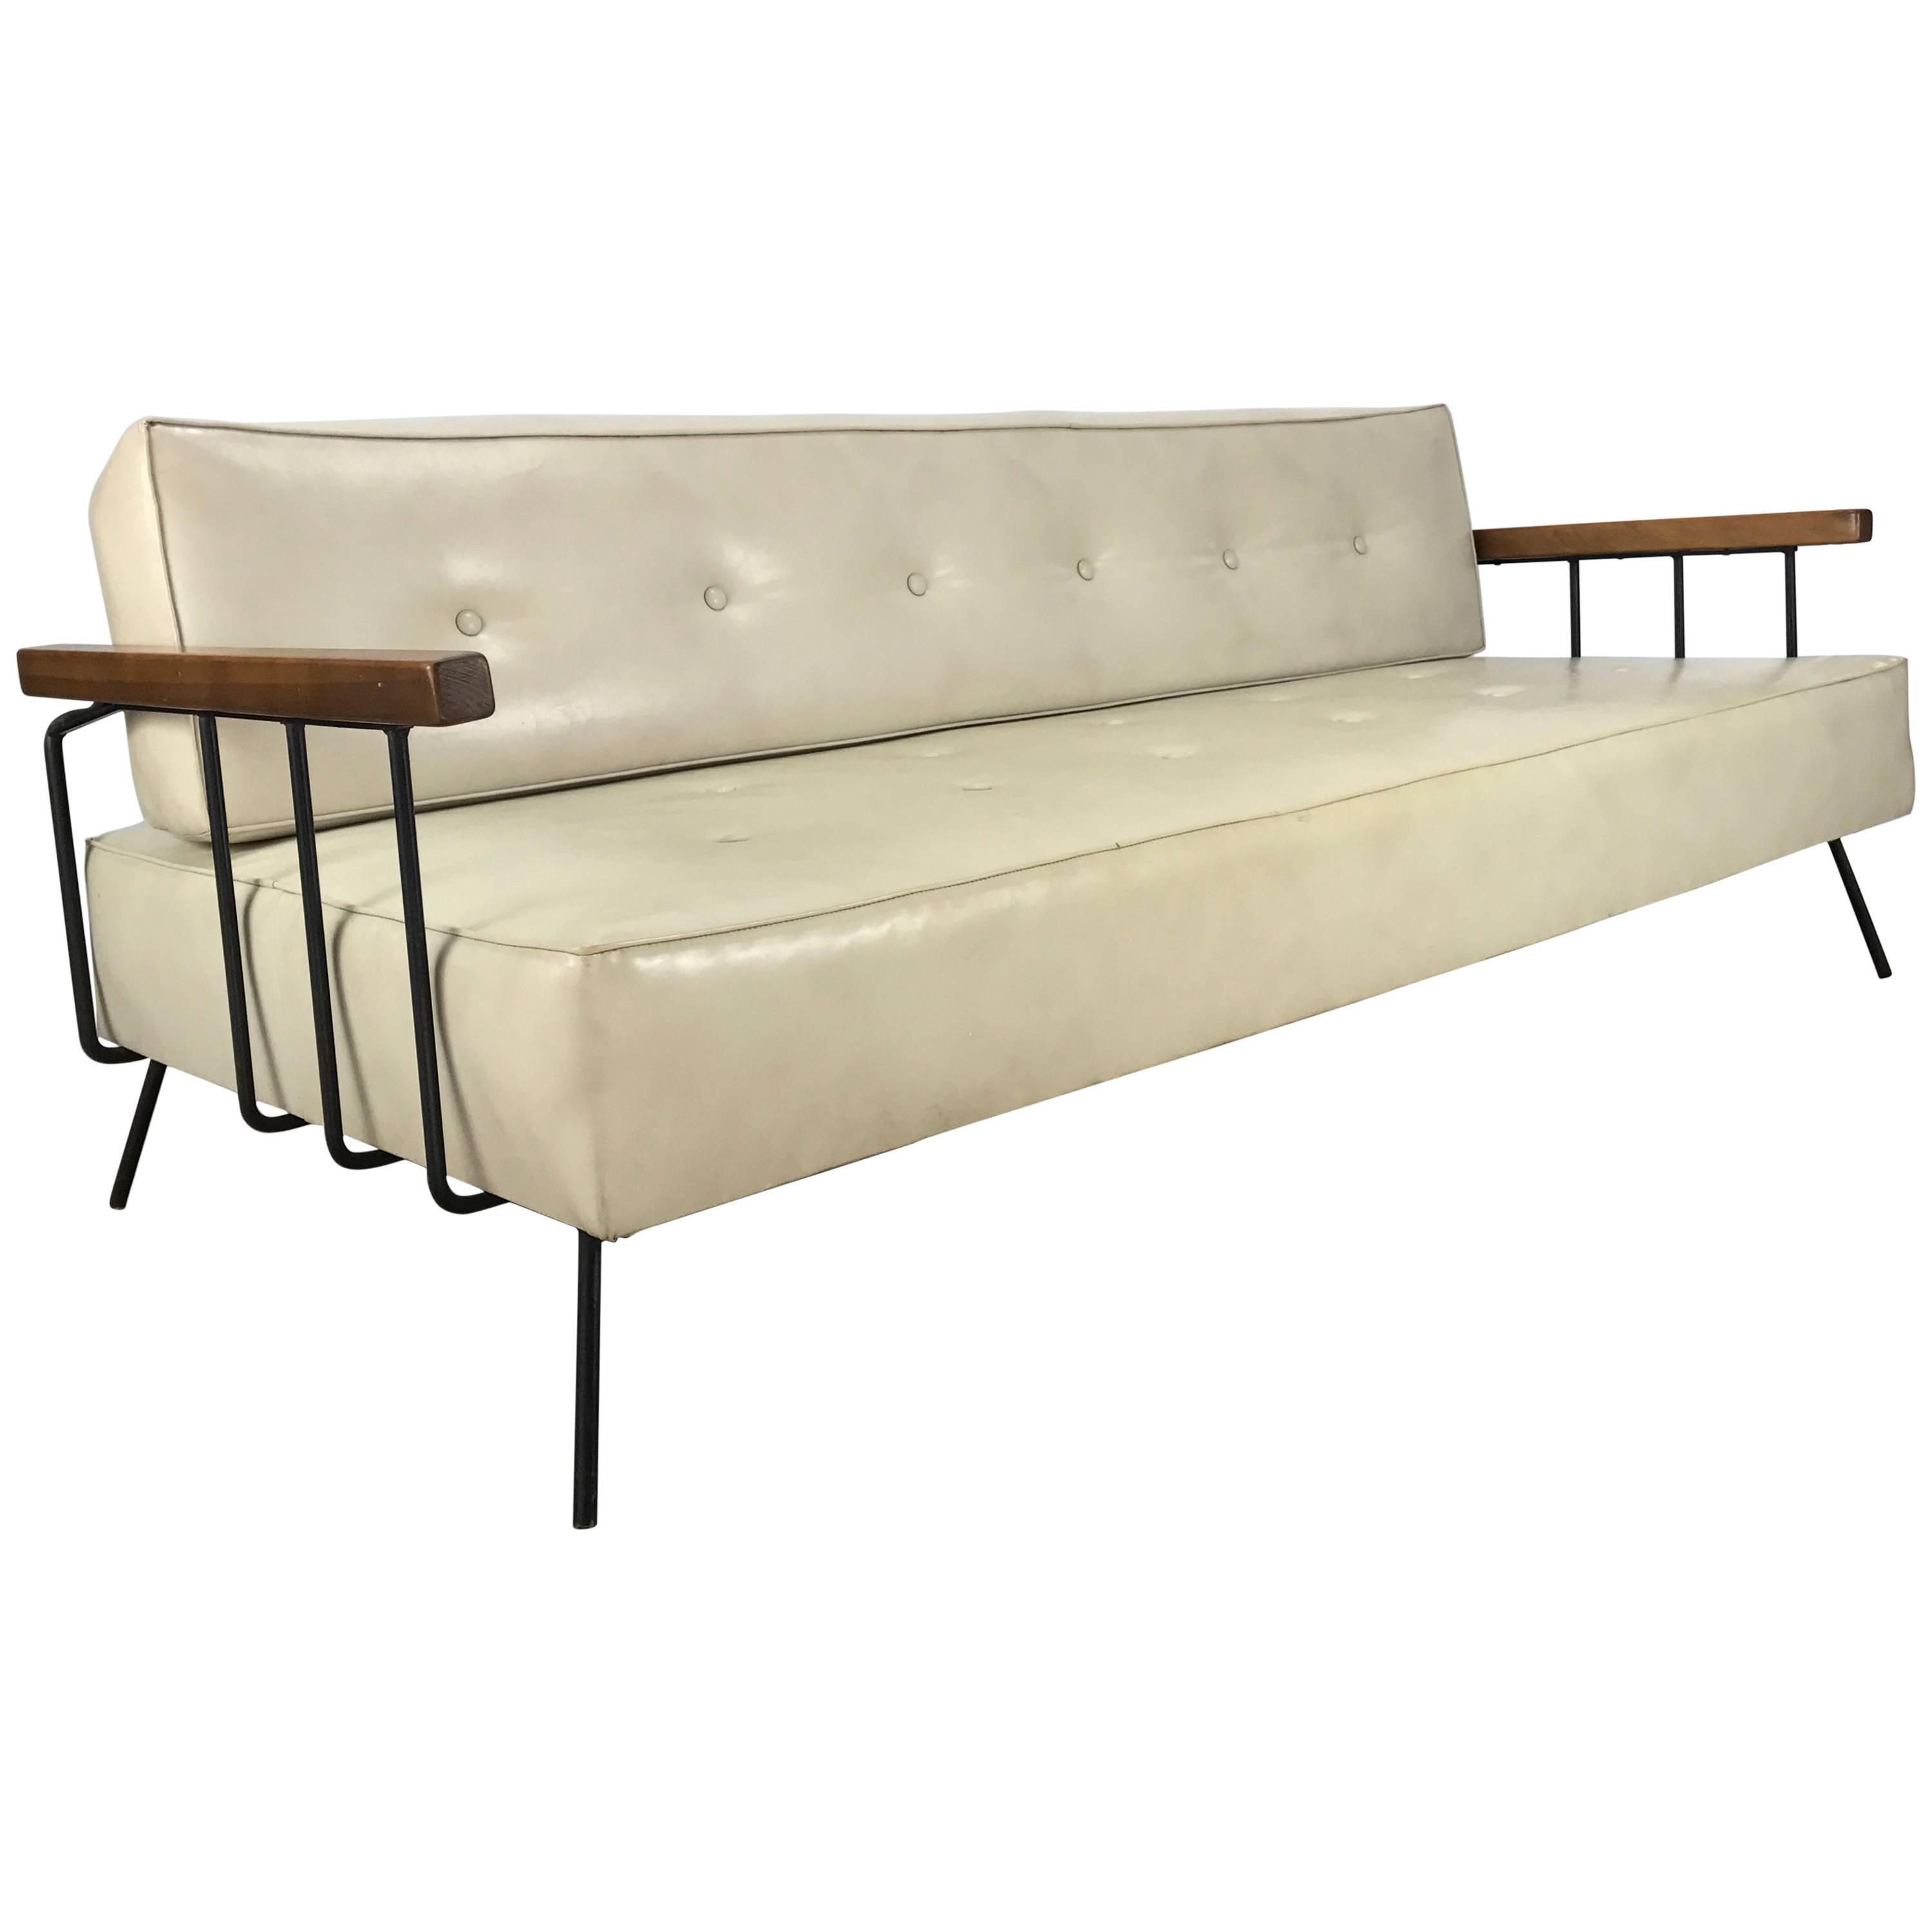 Classic Modernist Iron and Wood Sofa/Daybed in the Manner of Weinberg-Salterini